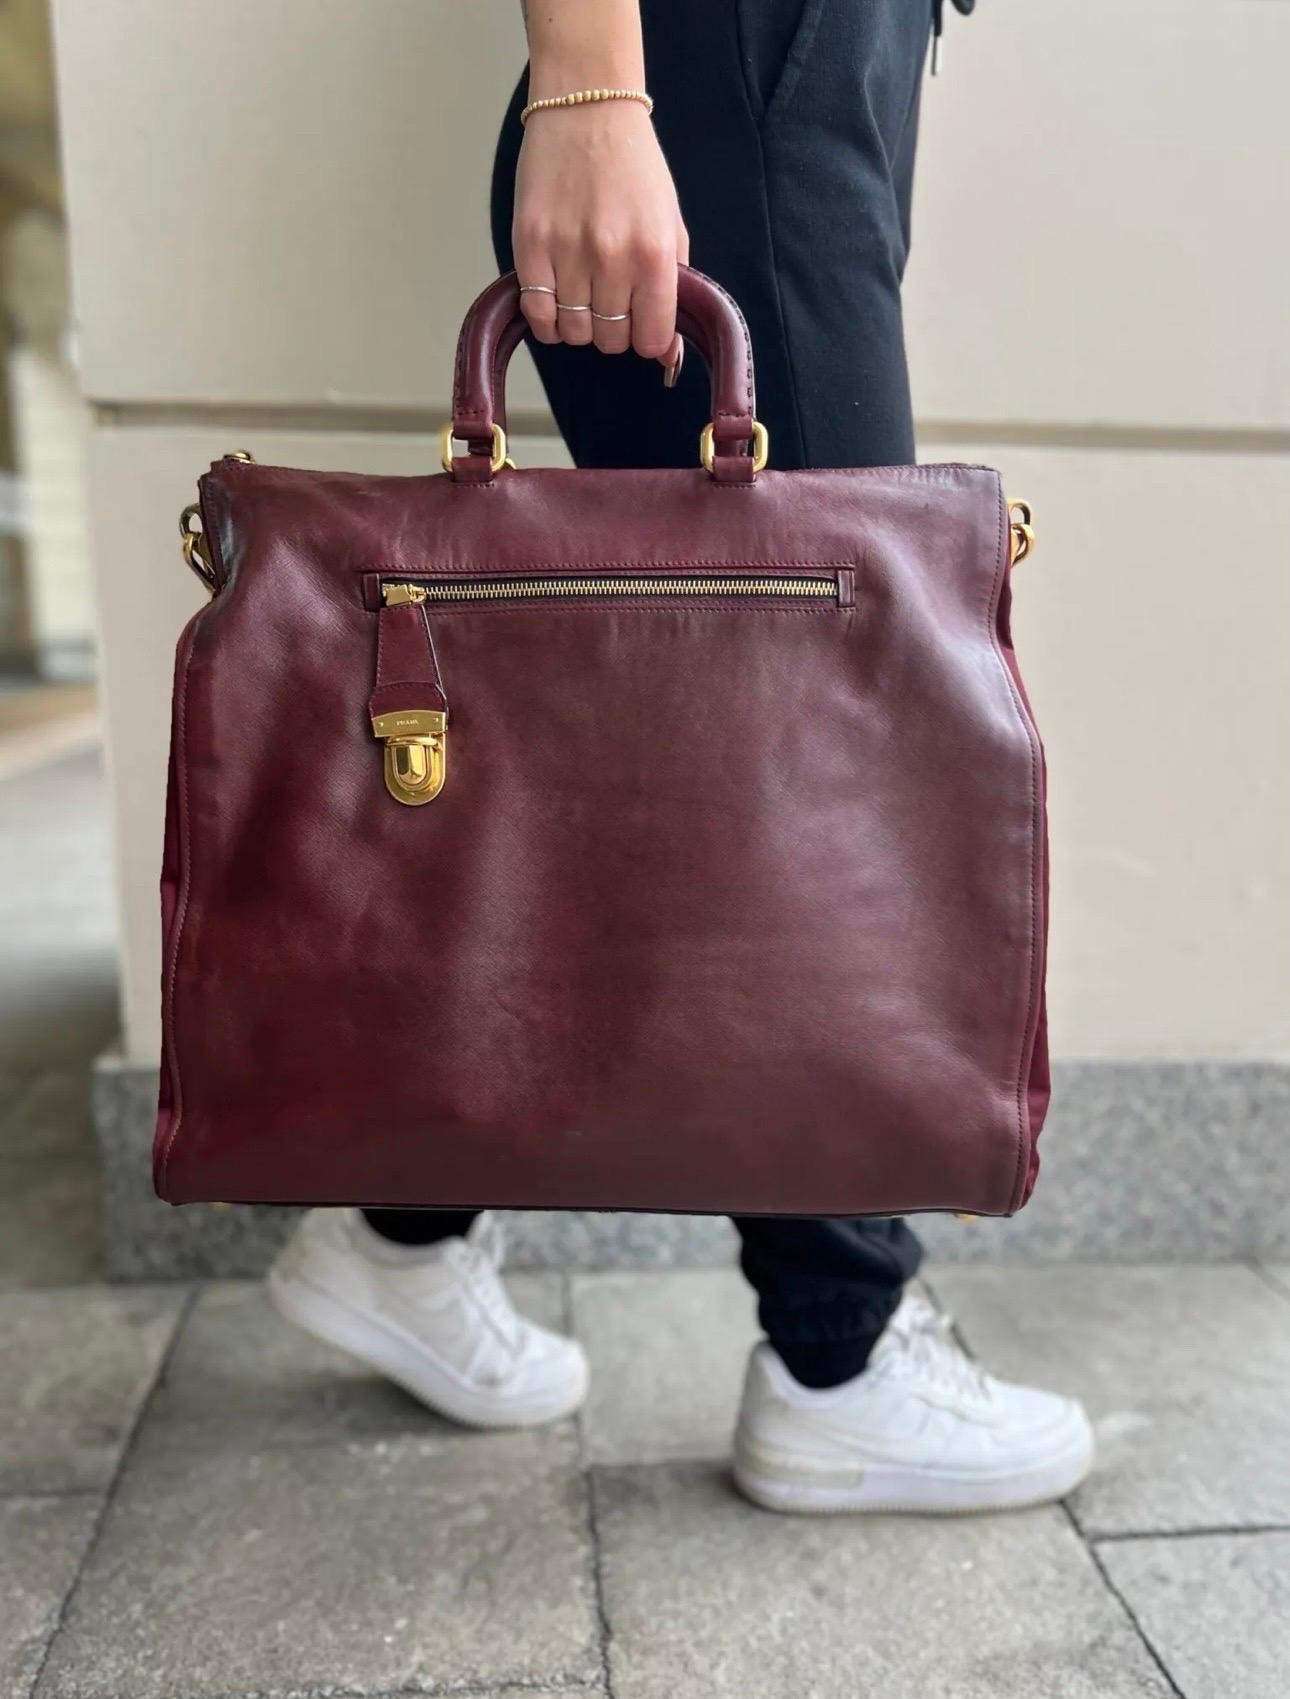 Bag signed Prada, Tote Bag line, made of burgundy leather and fabric with golden hardware.

Equipped with double leather handle and removable shoulder strap to wear the bag by hand or on the shoulder.

Internally lined in burgundy fabric, very roomy